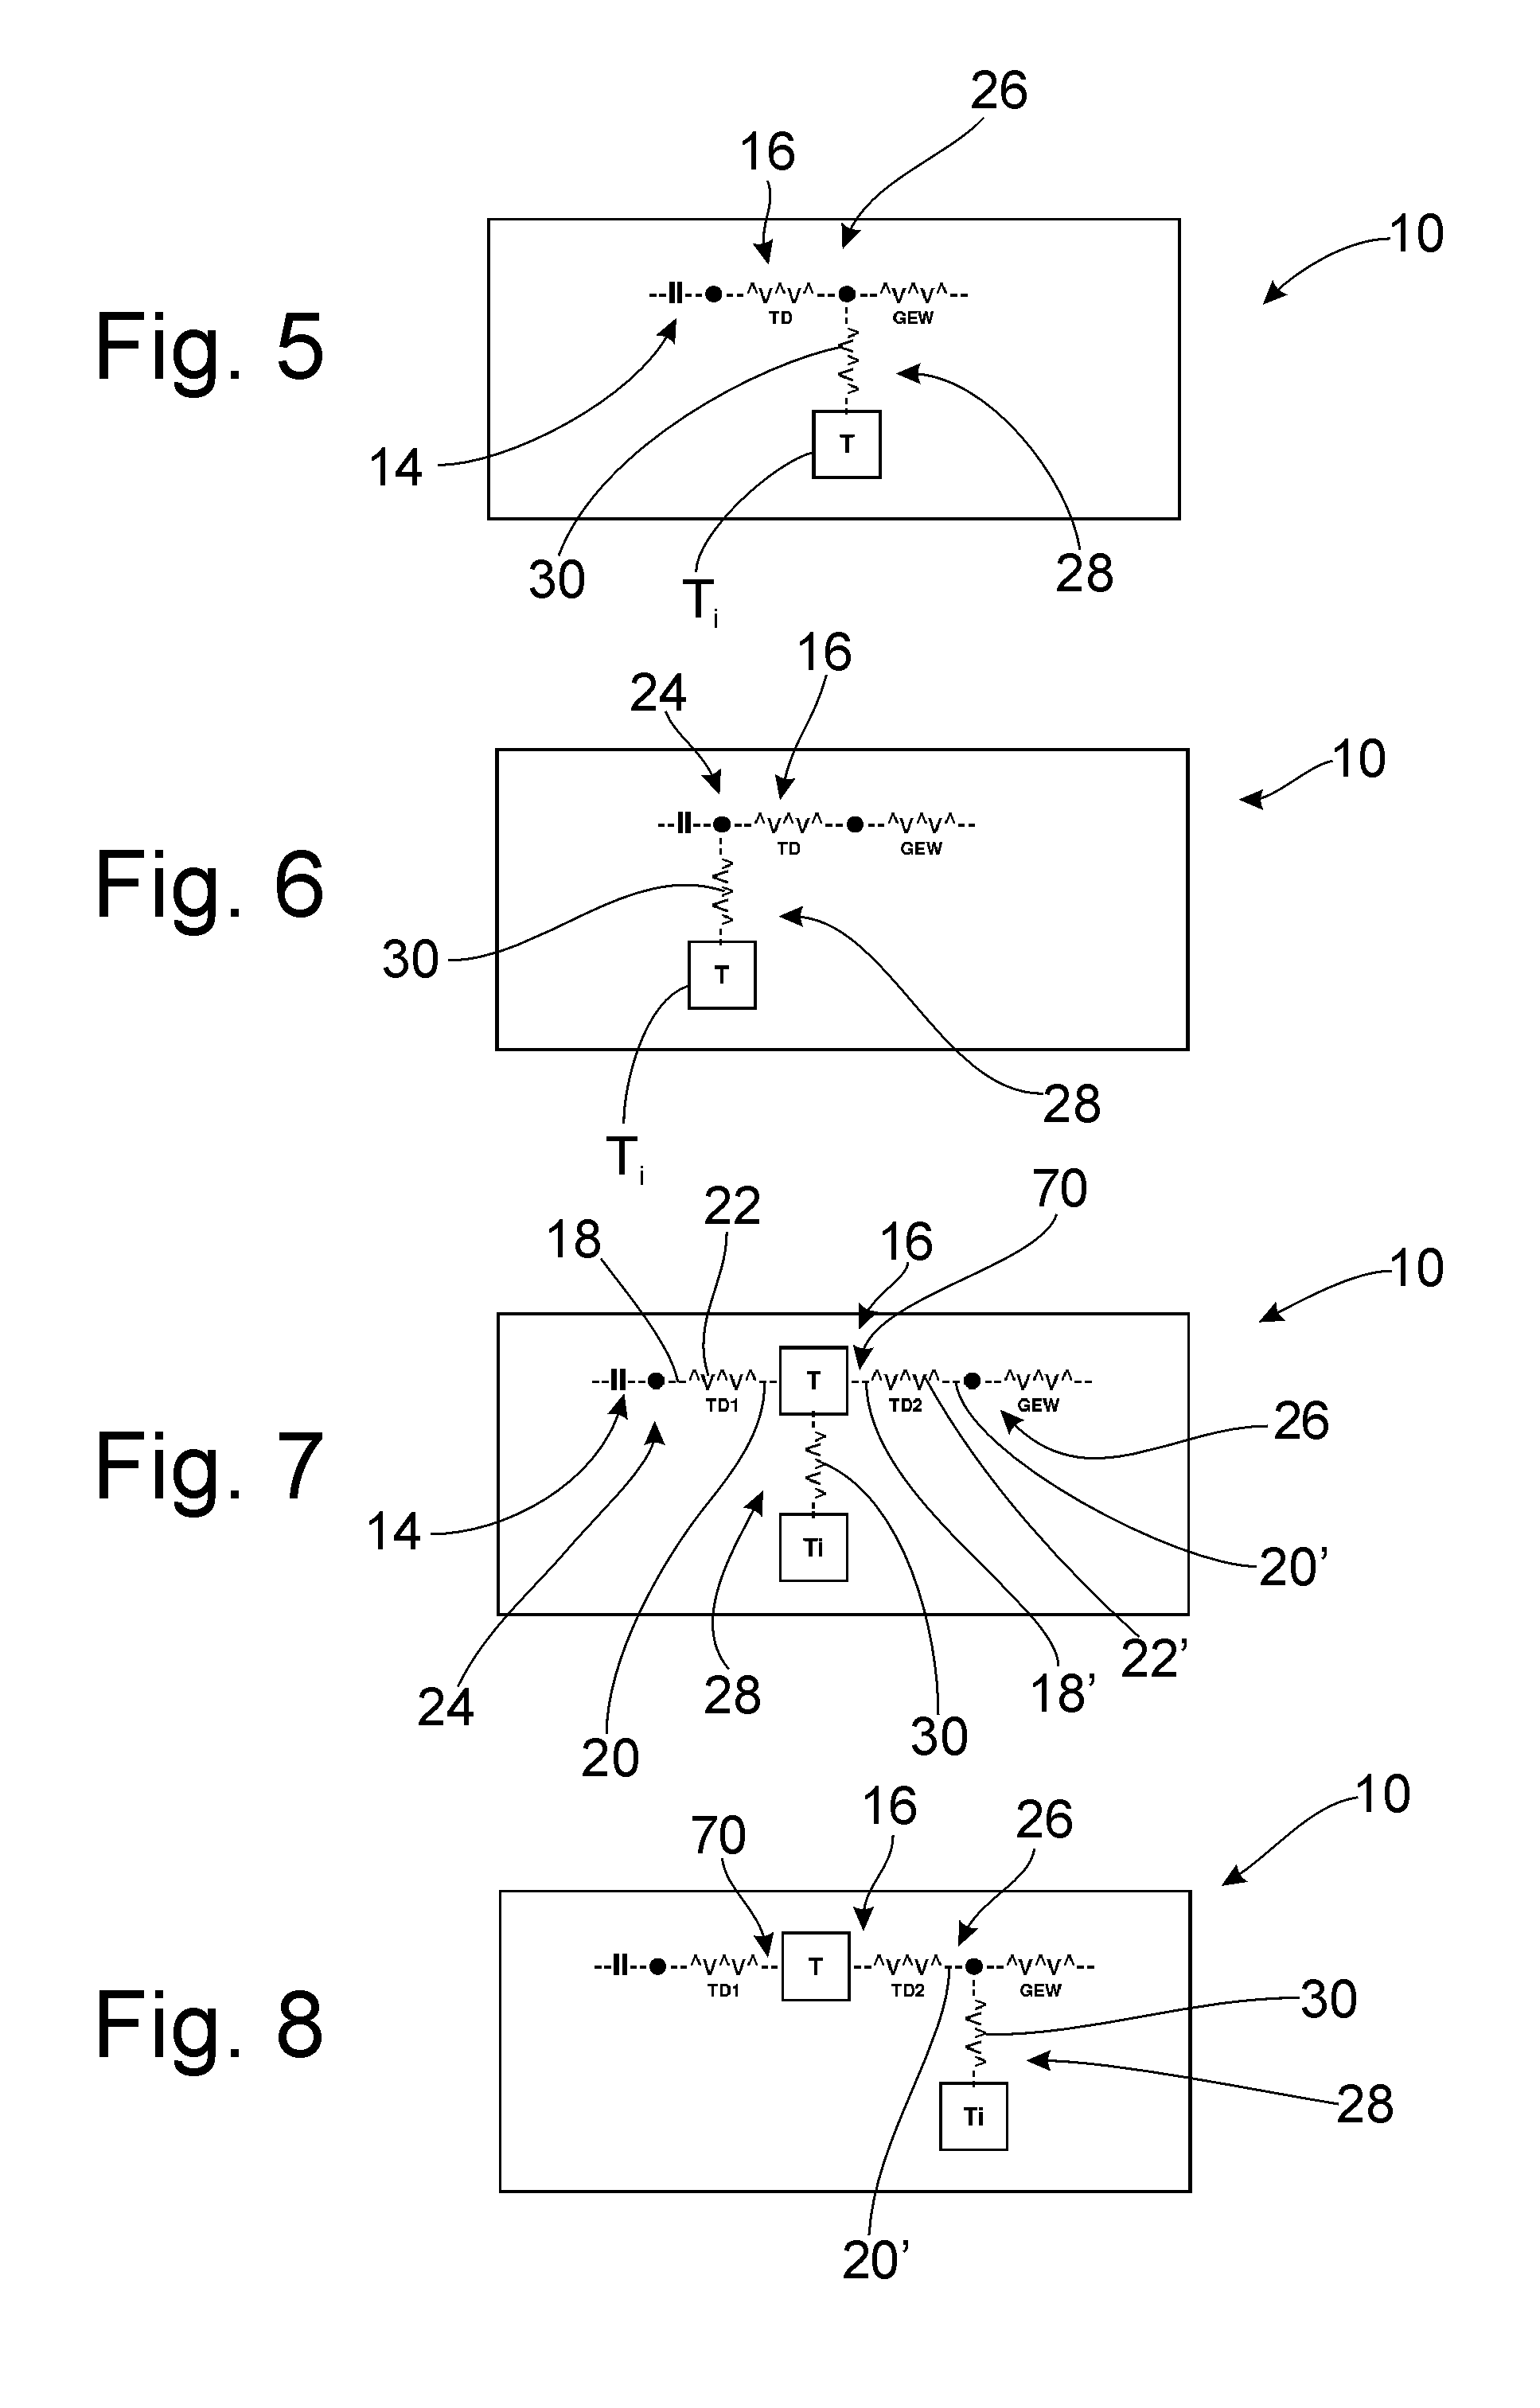 Torque Transmission Assembly, In Particular Hydrodynamic Torque Converter, Fluid Coupling Or Wet-Running Clutch